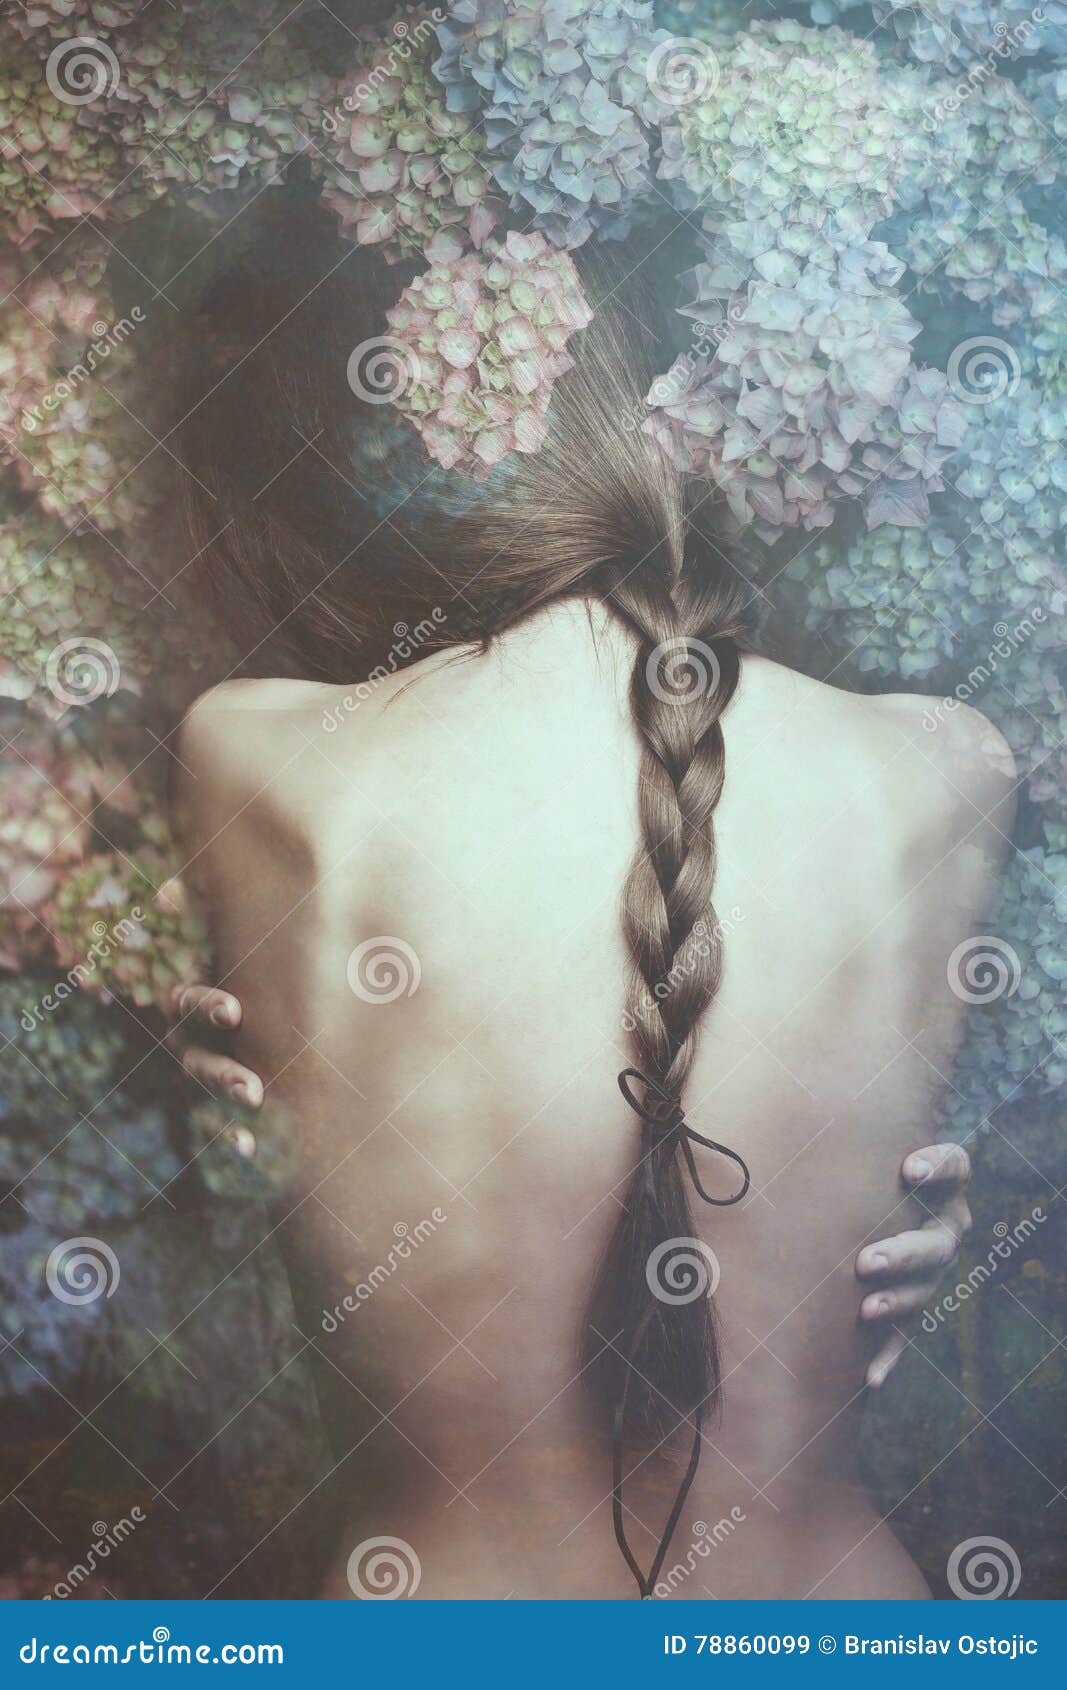 intimate woman portrait with flowers